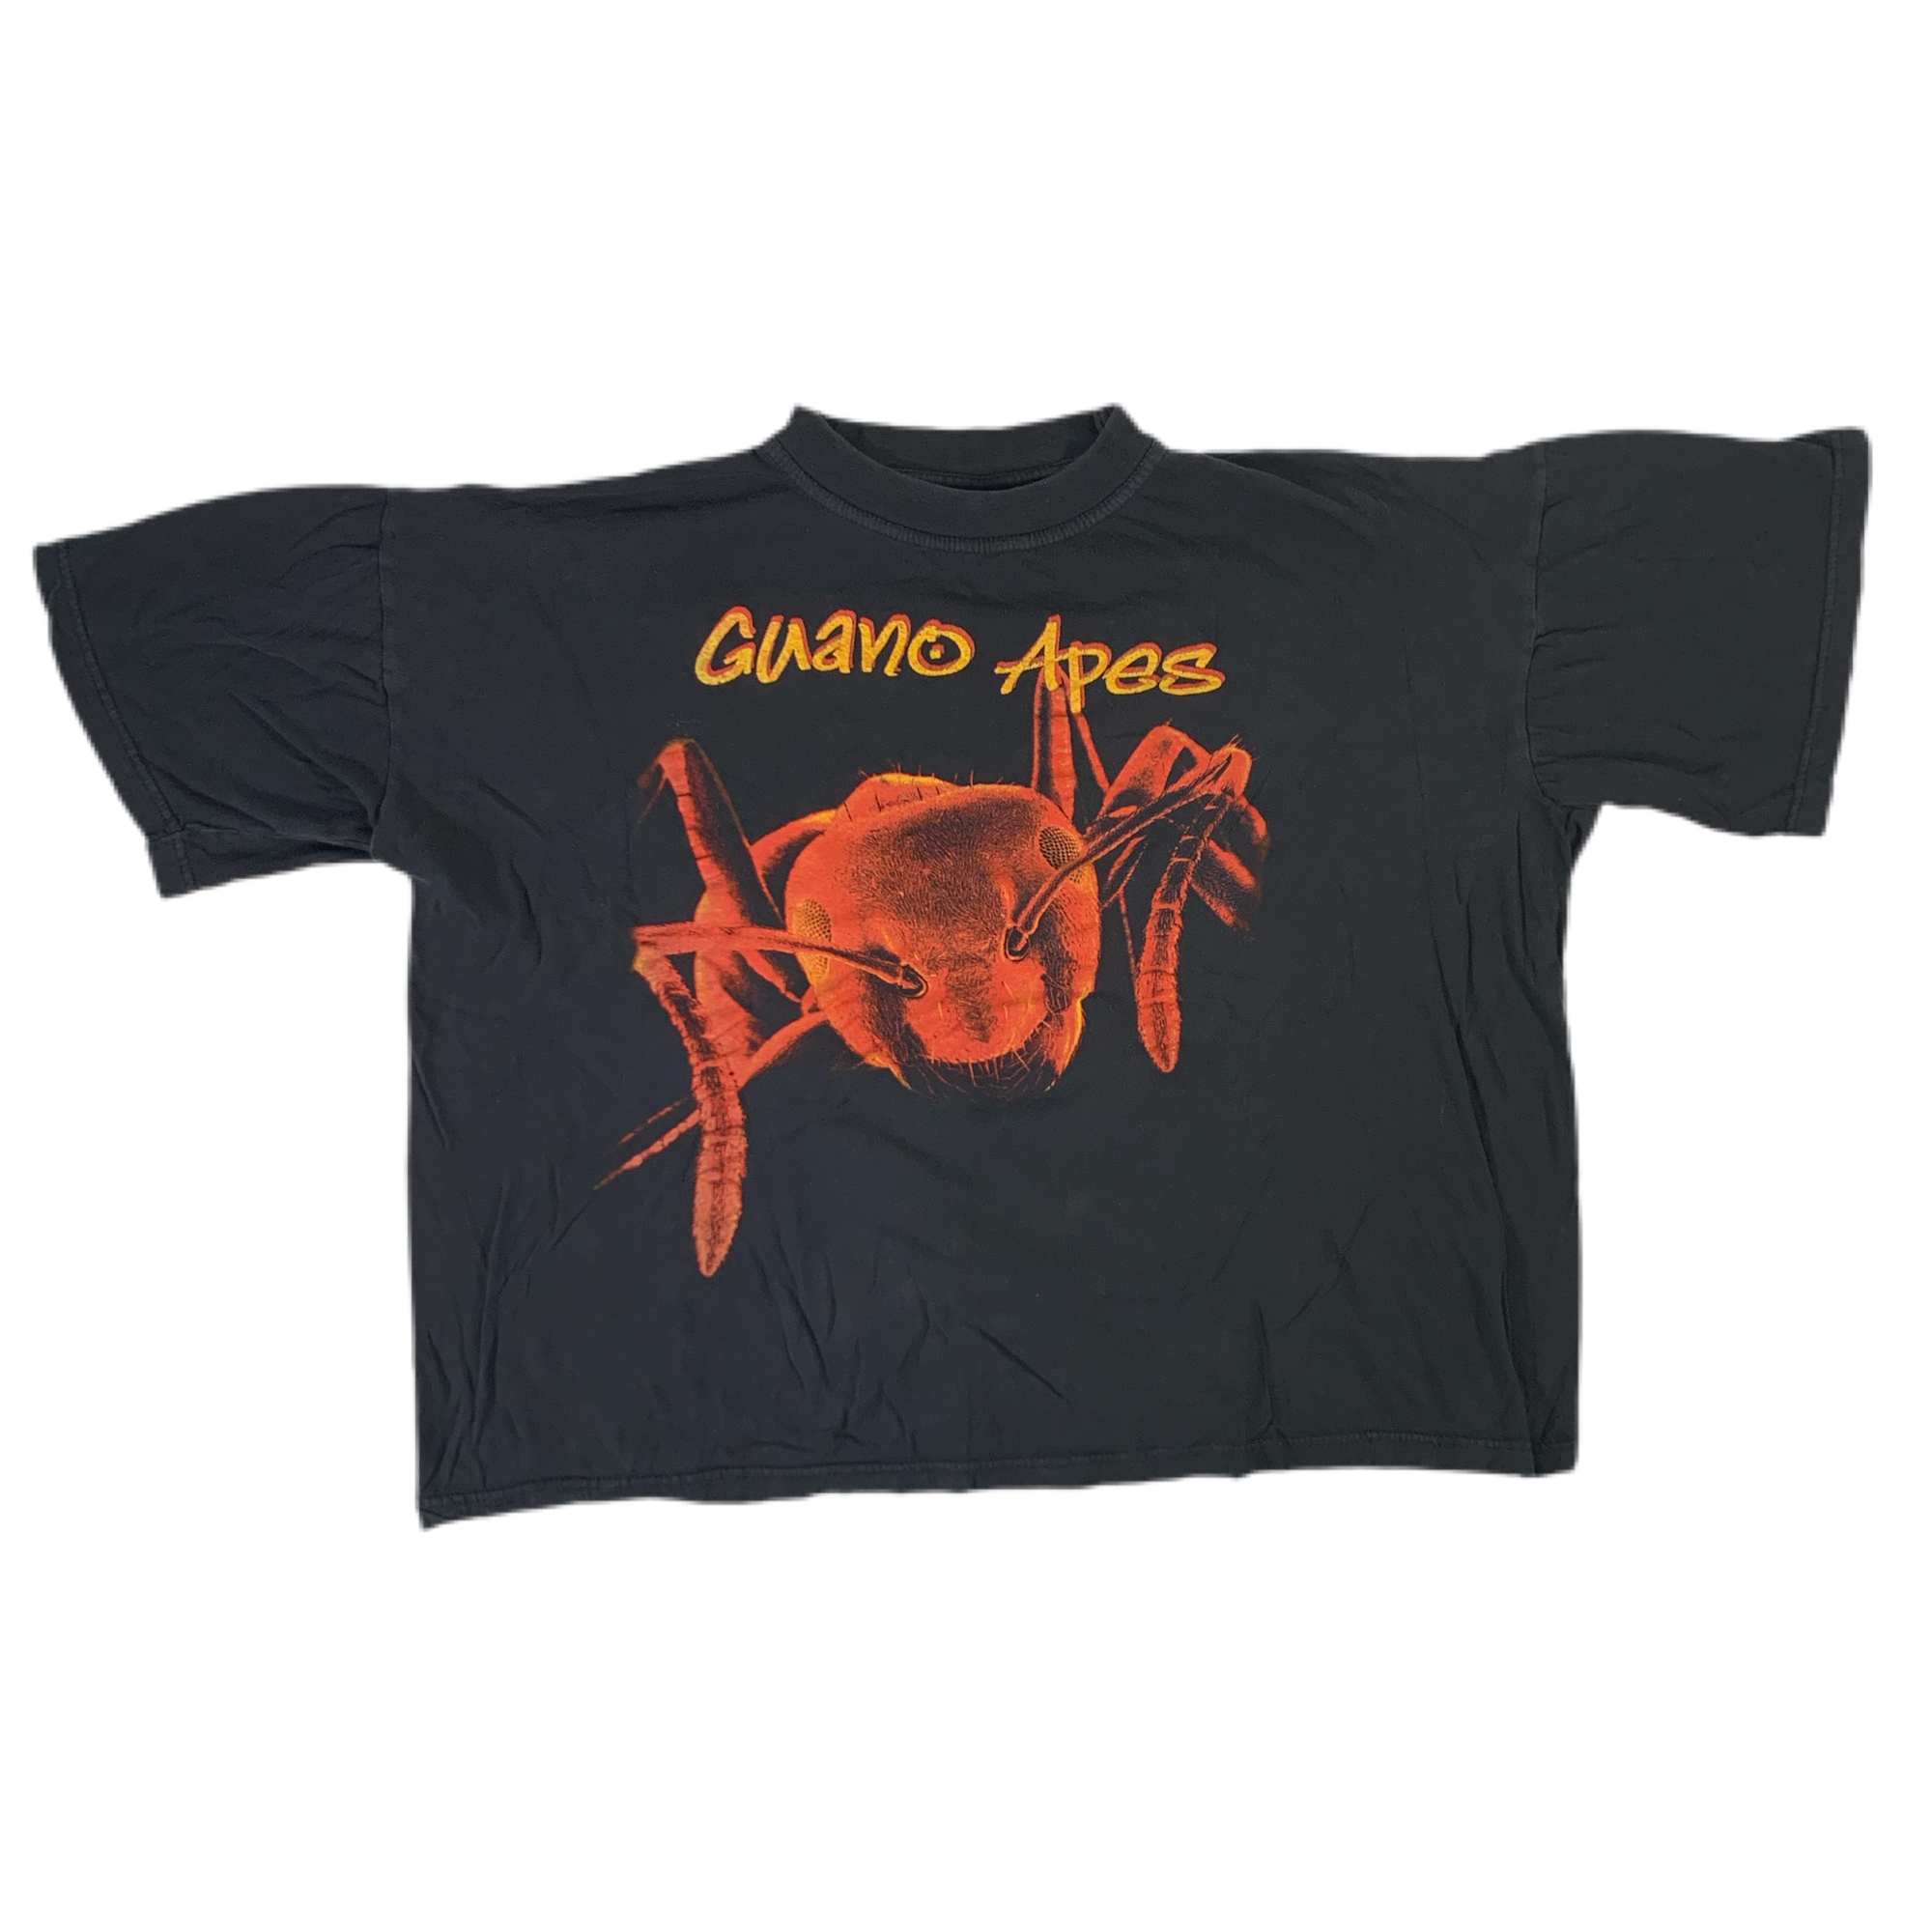 Vintage Guano Apes “Don’t Give Me Names” T-Shirt - jointcustodydc